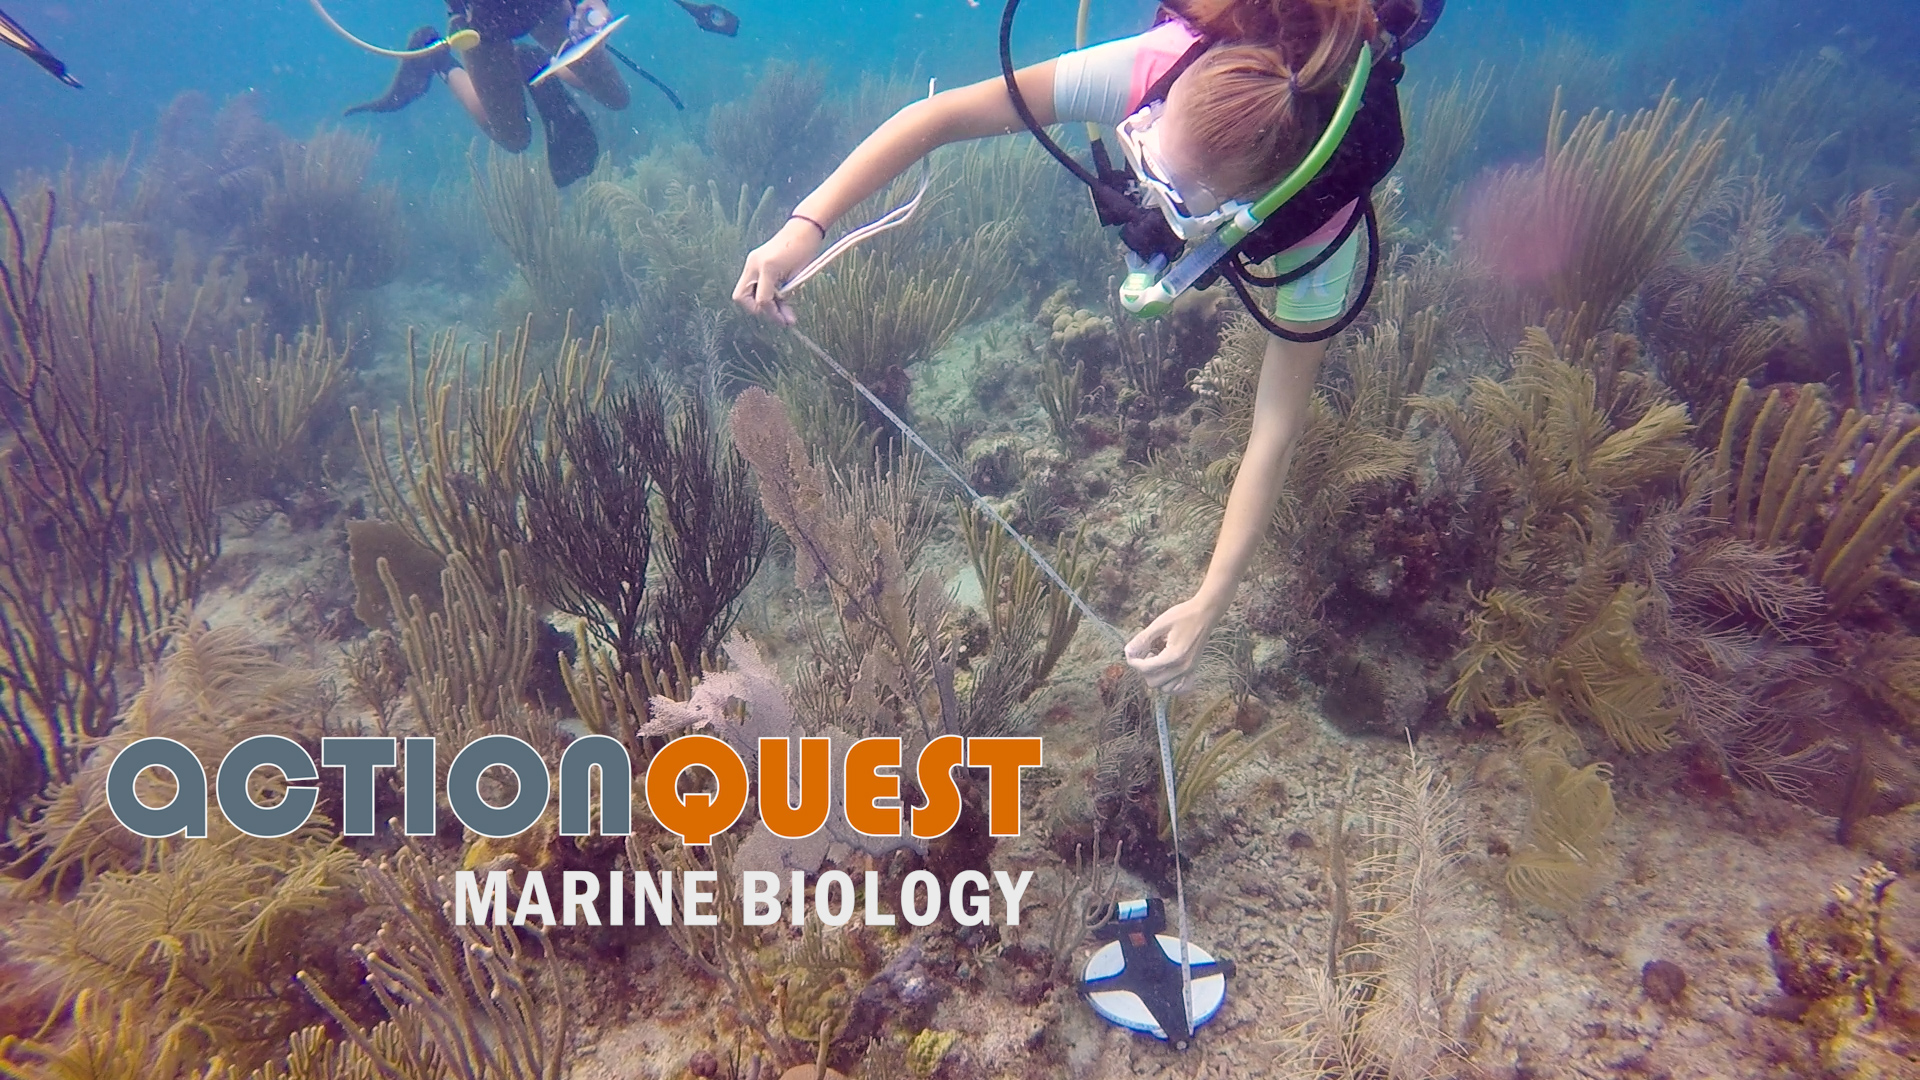 Marine Biology Summer Camps and Programs for Teens | ActionQuest